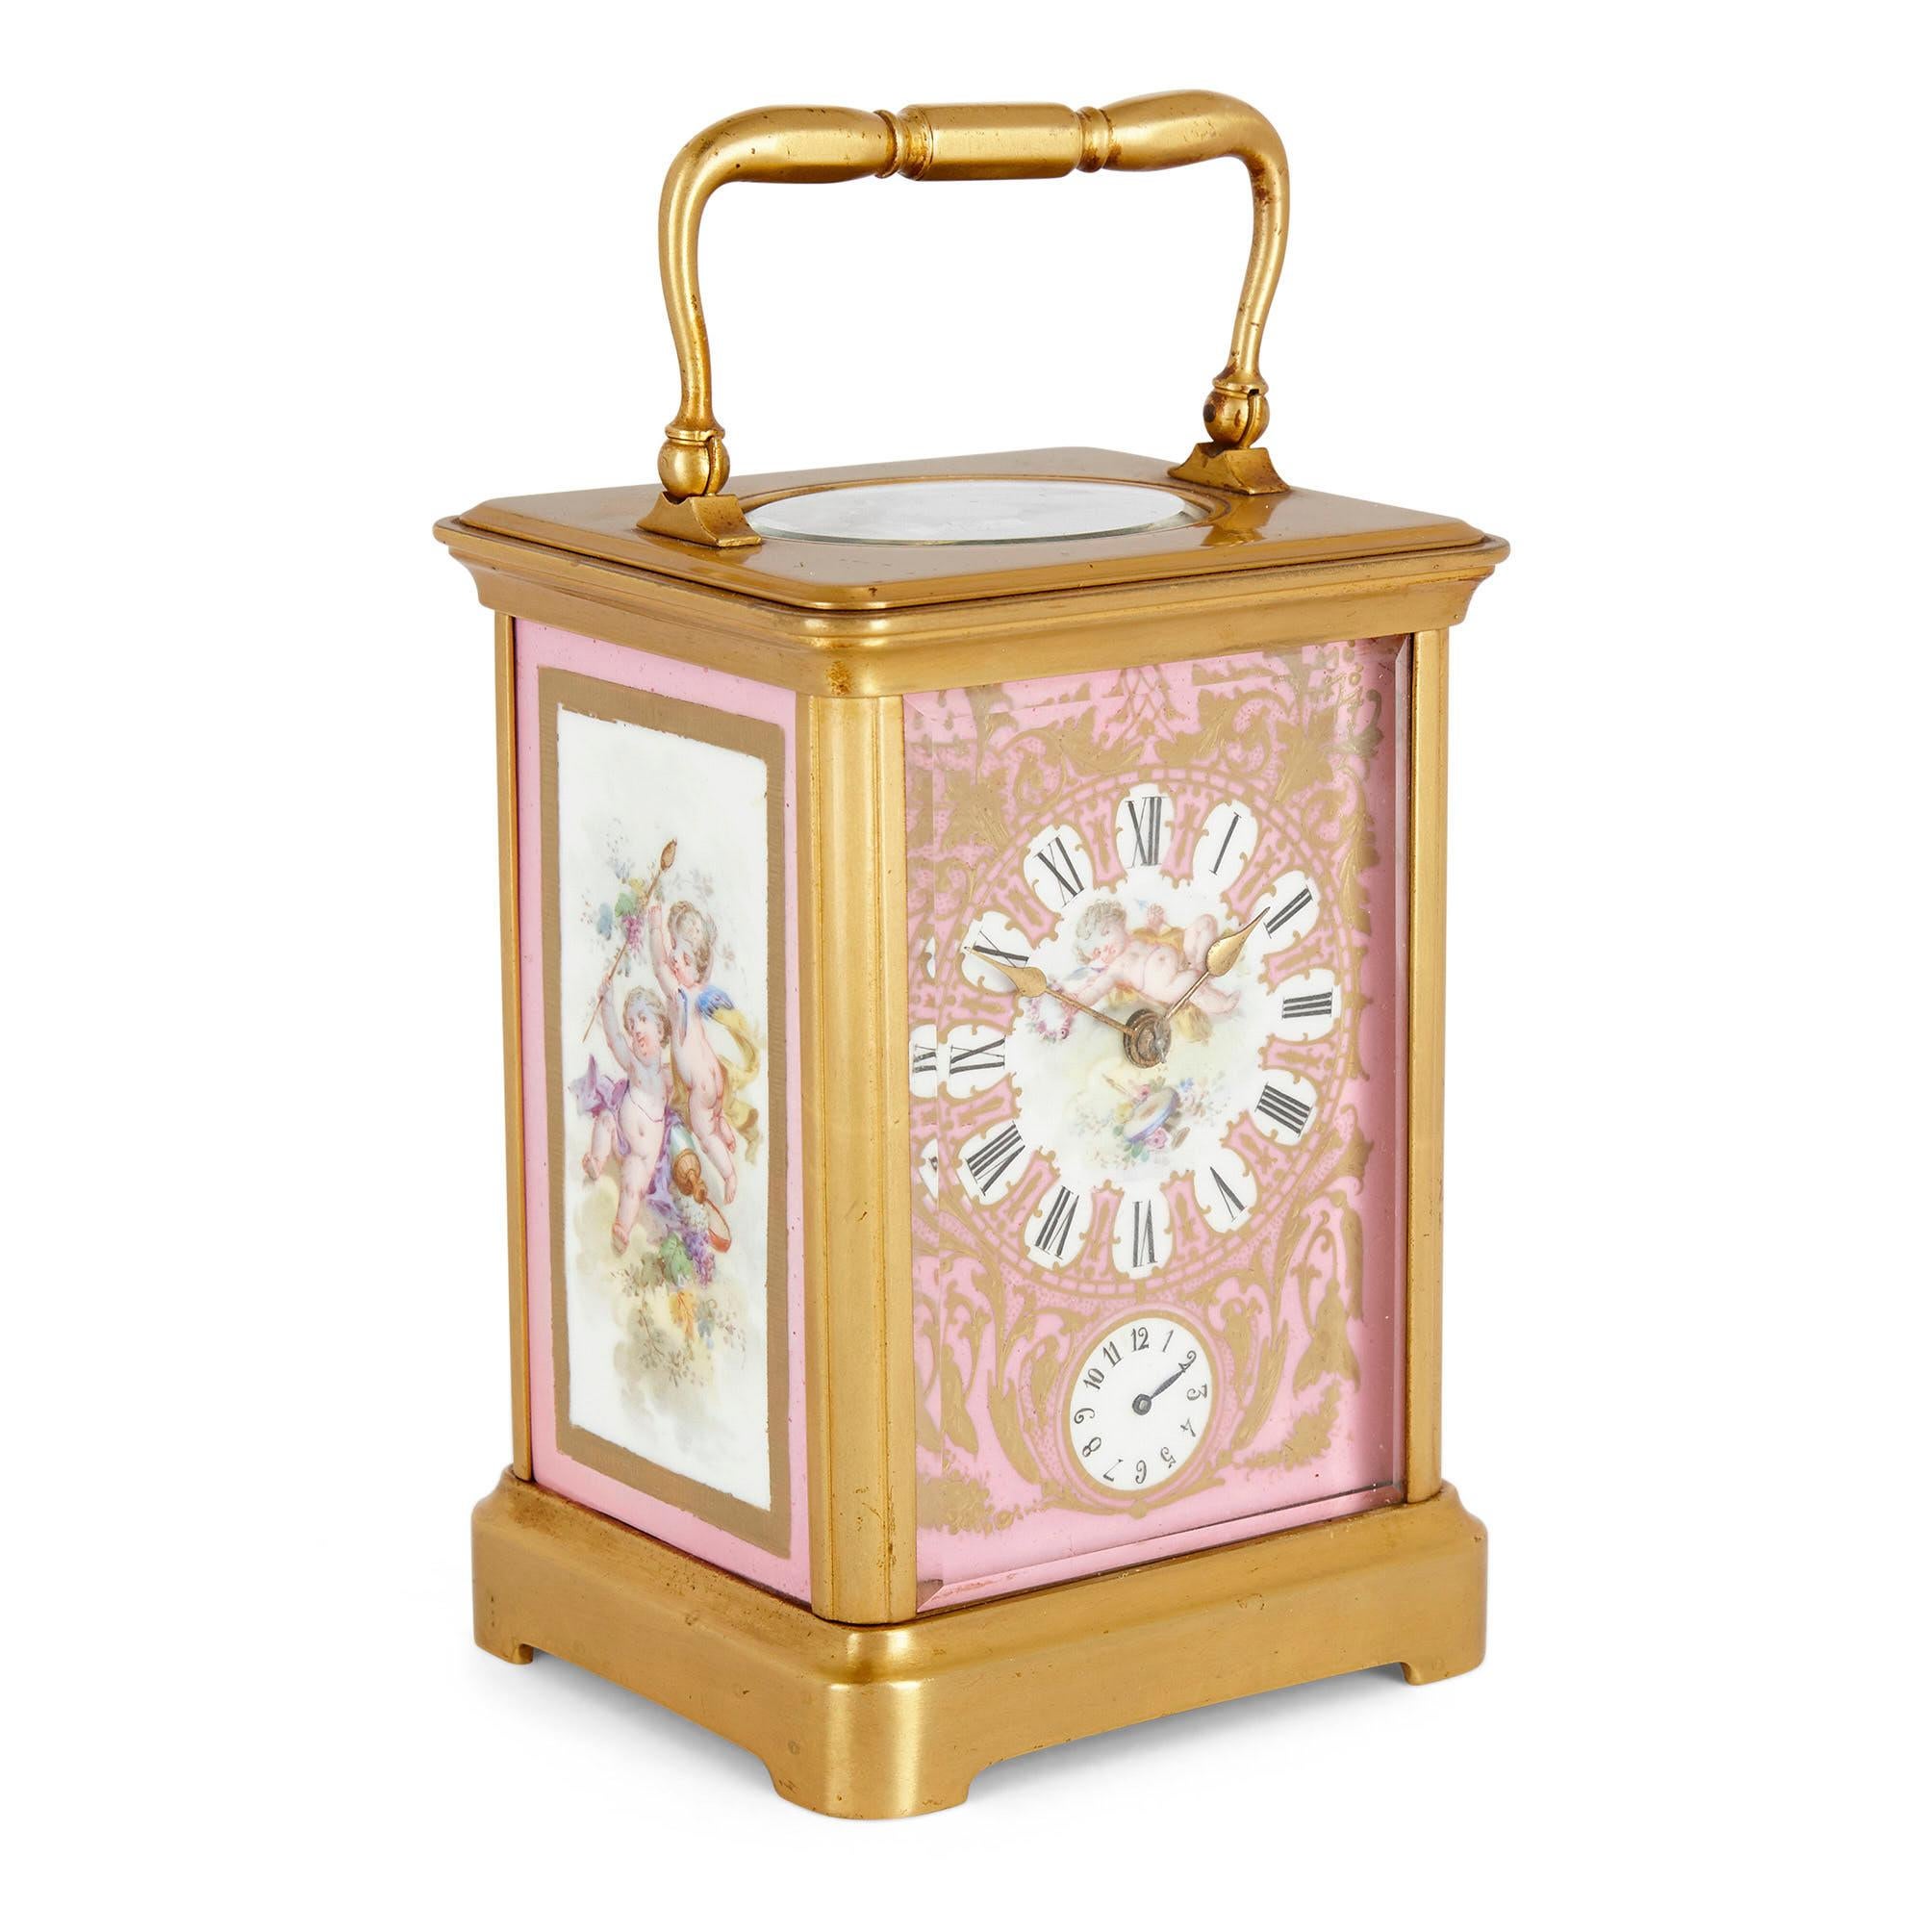 Rococo Style Sevres Style Porcelain and Ormolu Carriage Clock
French, late 19th Century
Dimensions: Height 18cm, width 10cm, depth 8.5cm

The carriage clock is of rectangular form and is crafted with a rectangular ormolu case set with Sevres style